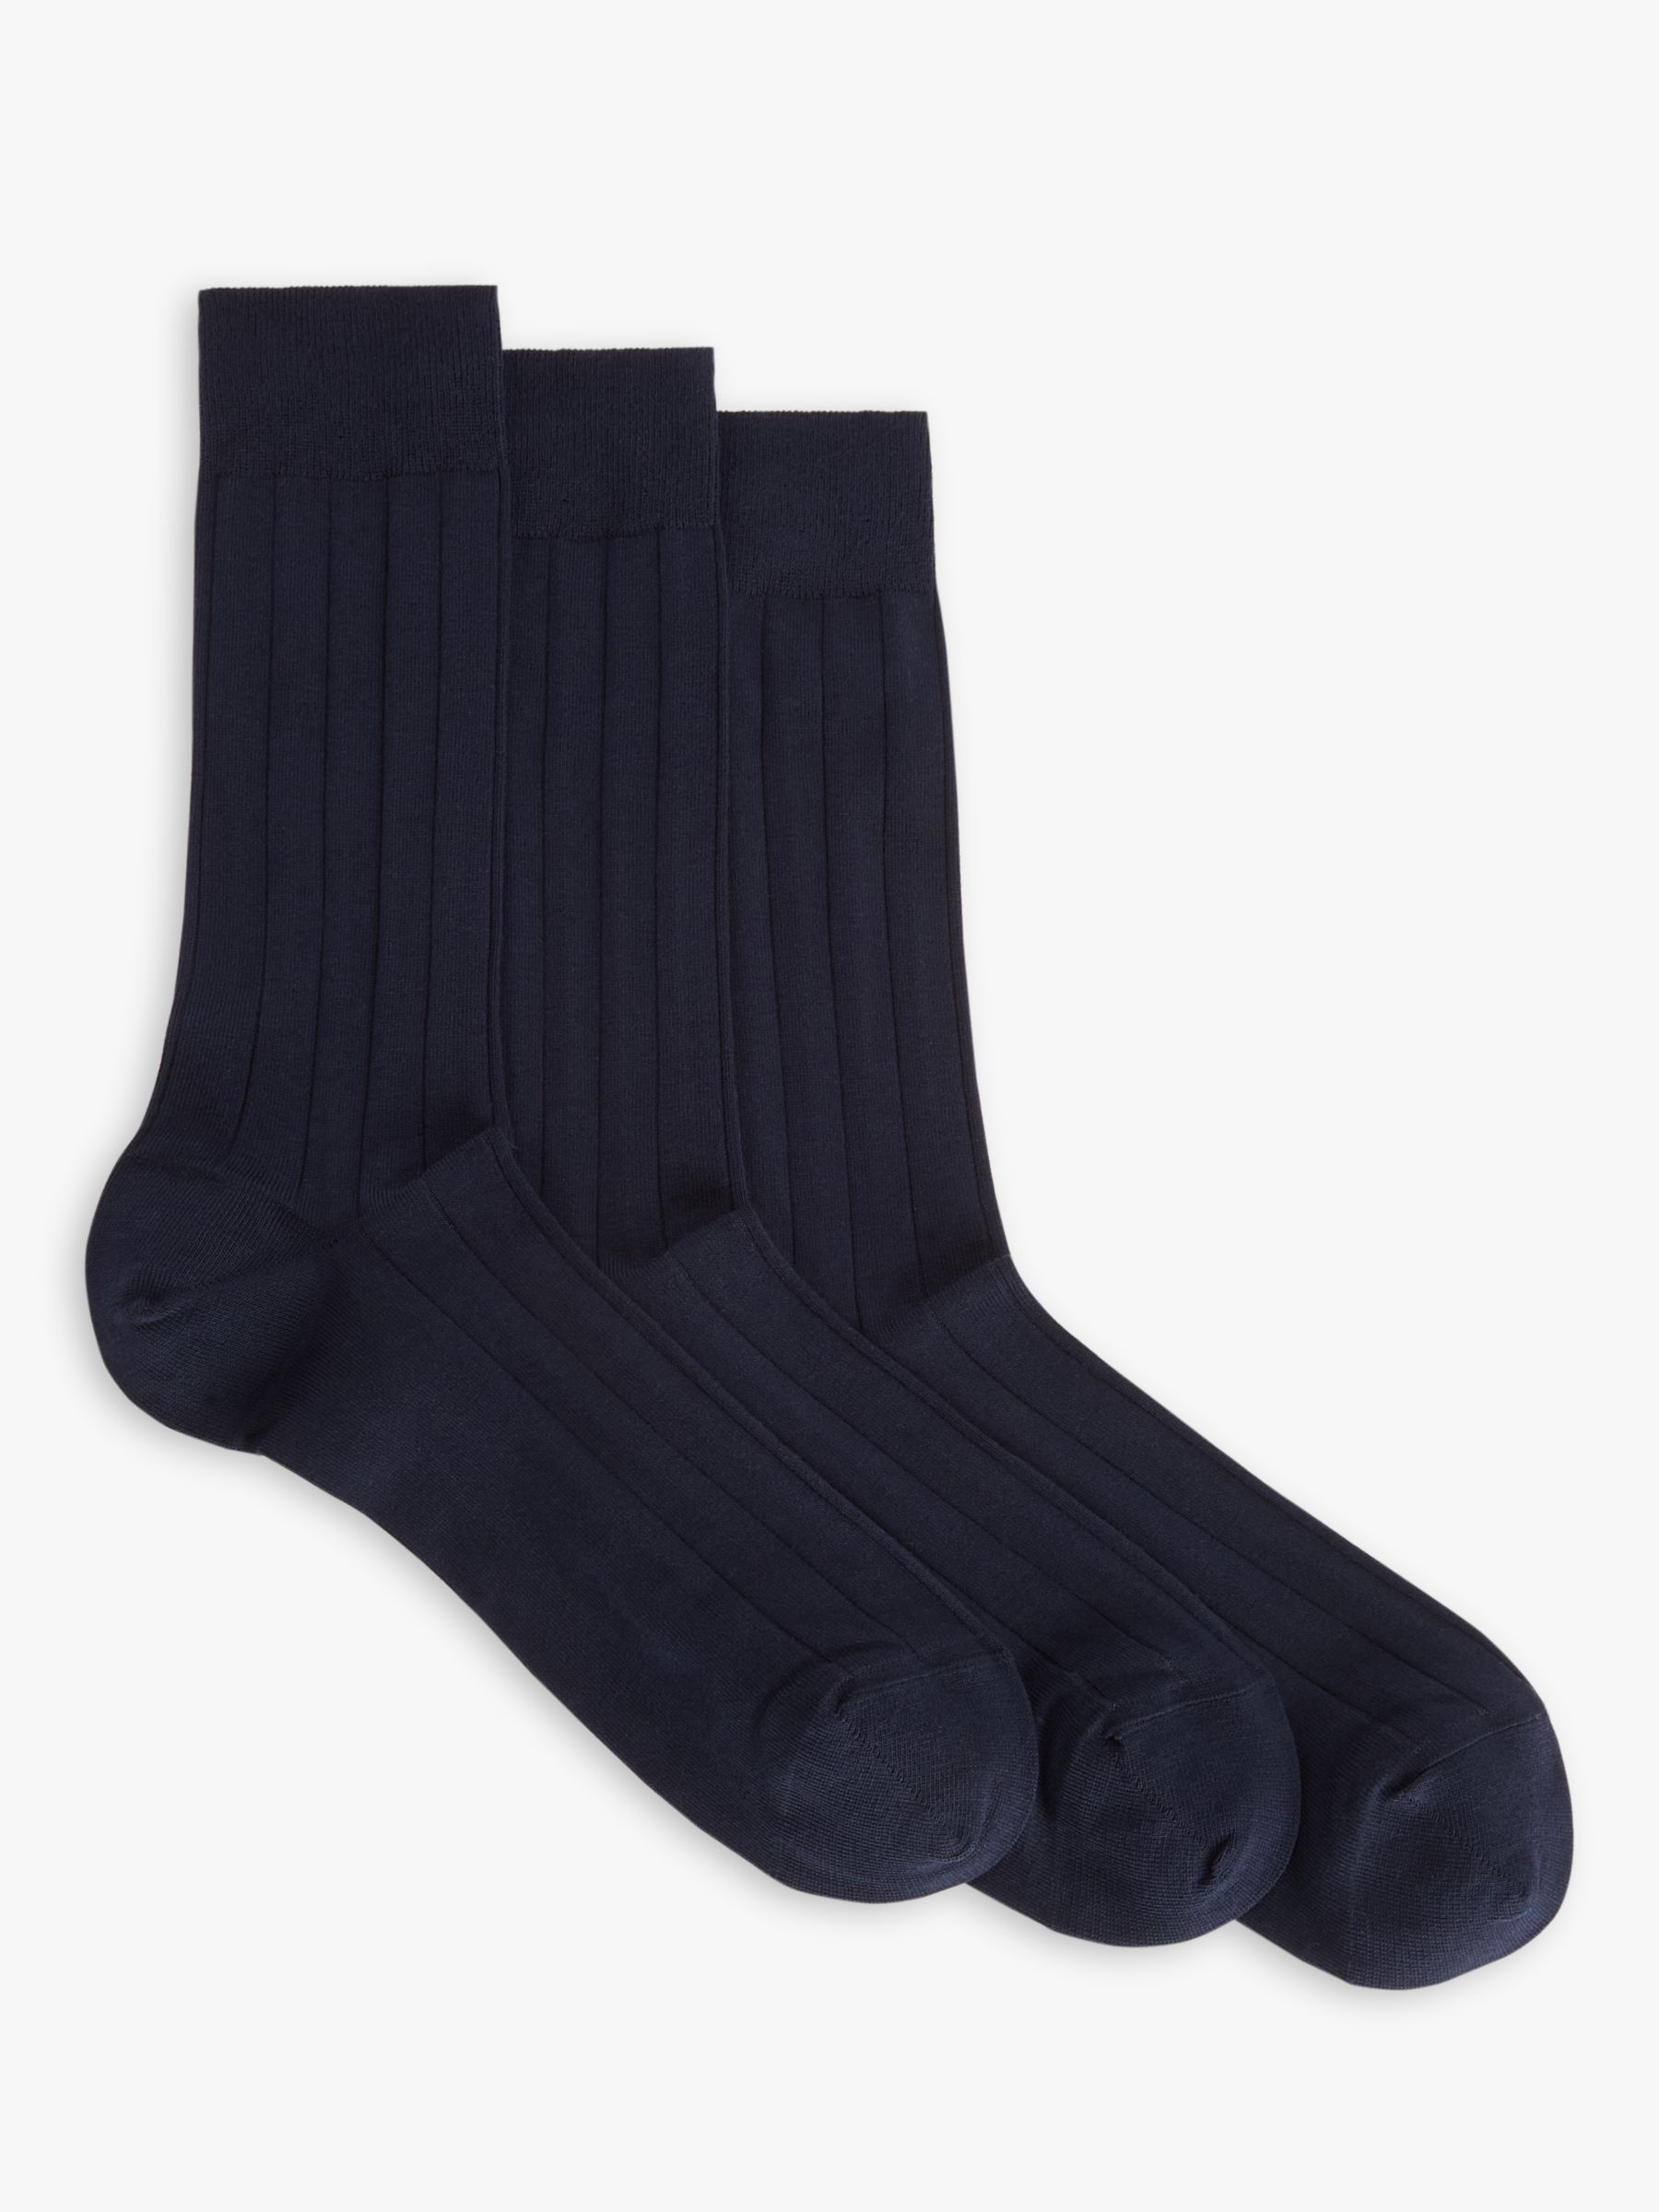 Buy John Lewis Made in Italy Cotton Socks, Pack of 3 Online at johnlewis.com